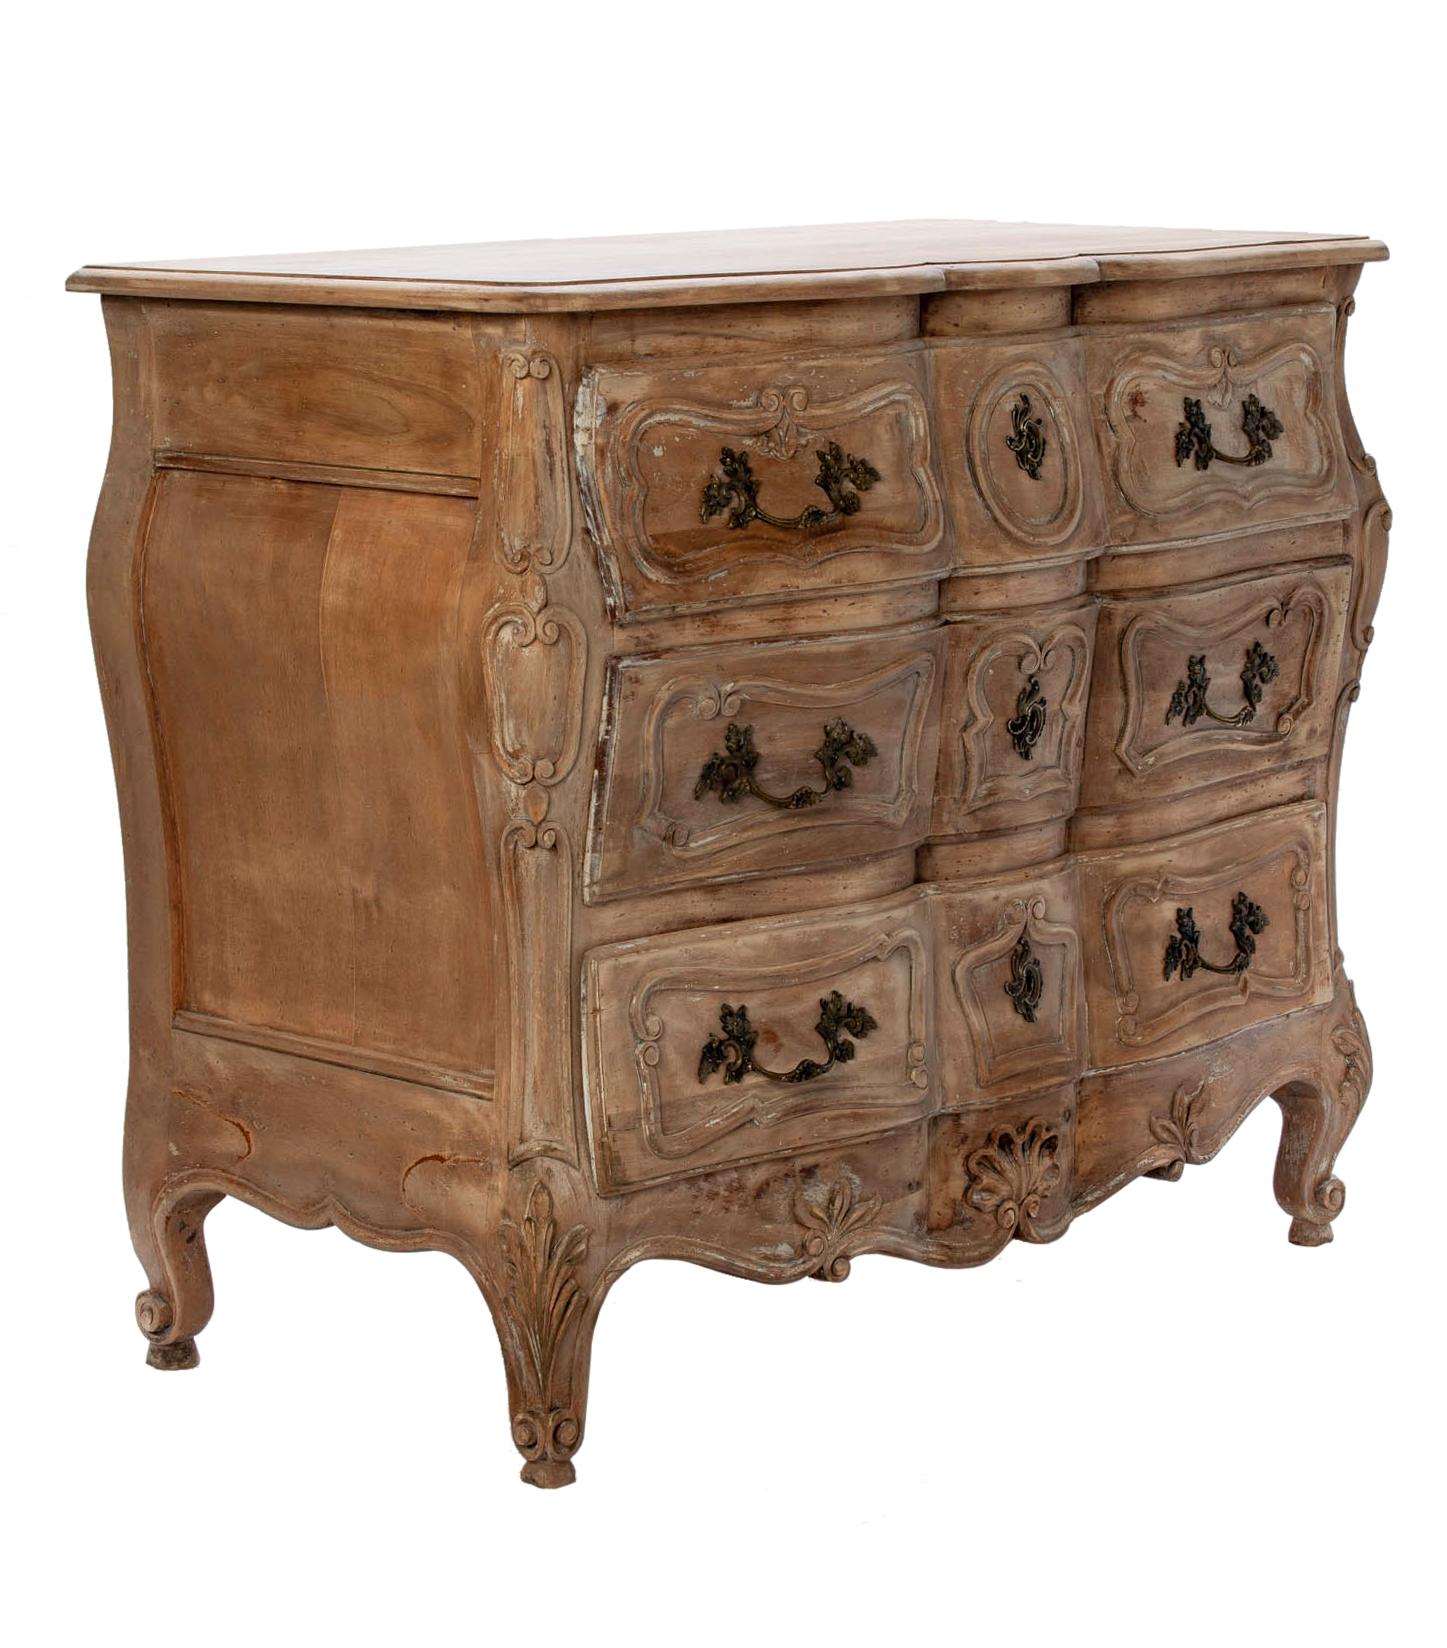 Keyed chest, stunning examples of Louis XV style commodes with a rustic twist. Handcarved details throughout. The original keys are included & open each drawer. Nude finish with blush of clear English bees wax.
The hardware is made of cast brass.